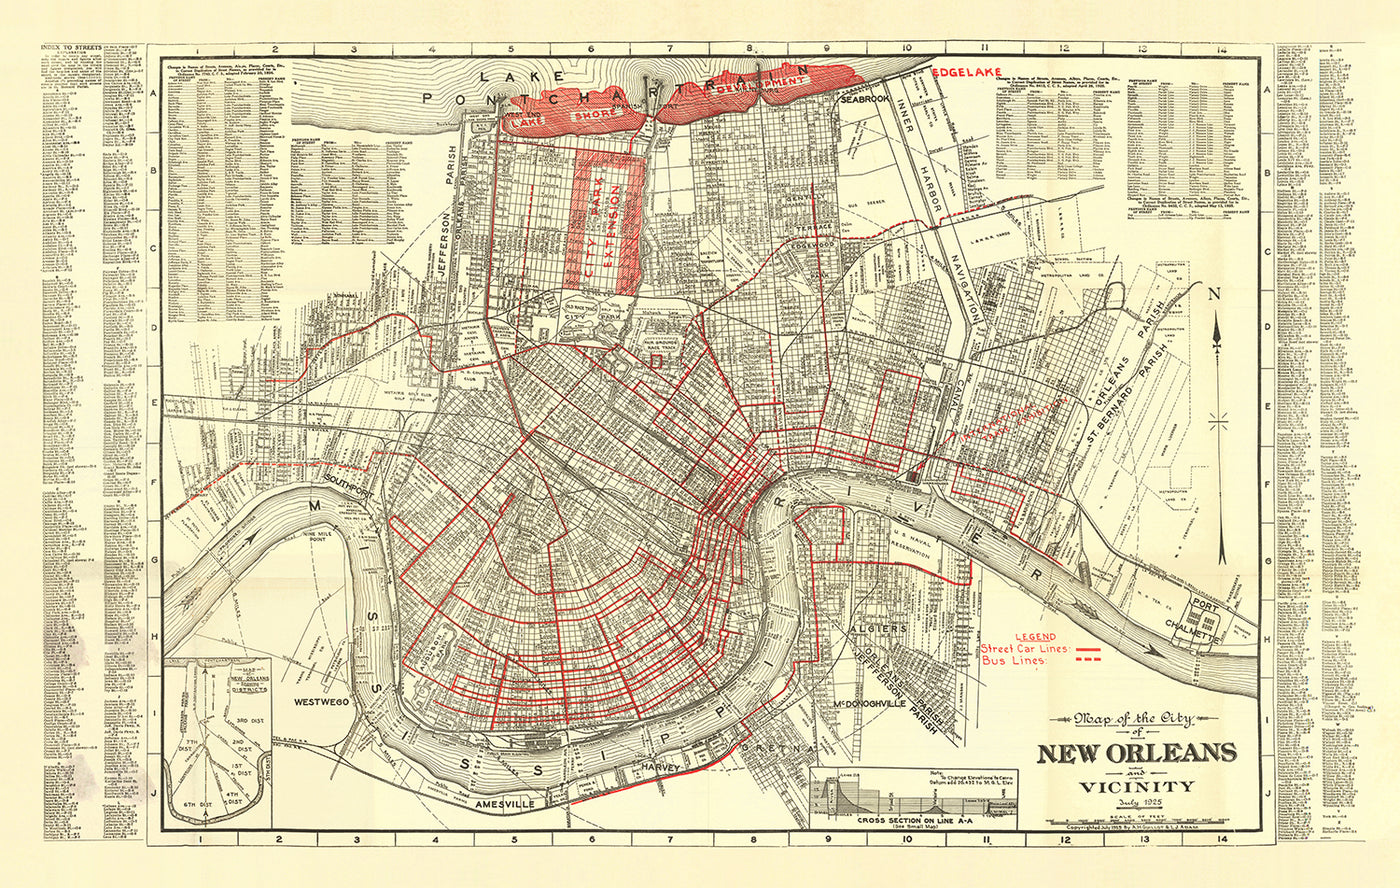 Old Map of New Orleans by Guilot & Adam, 1925: French Quarter, Treme, Algiers, Metairie, and City Park